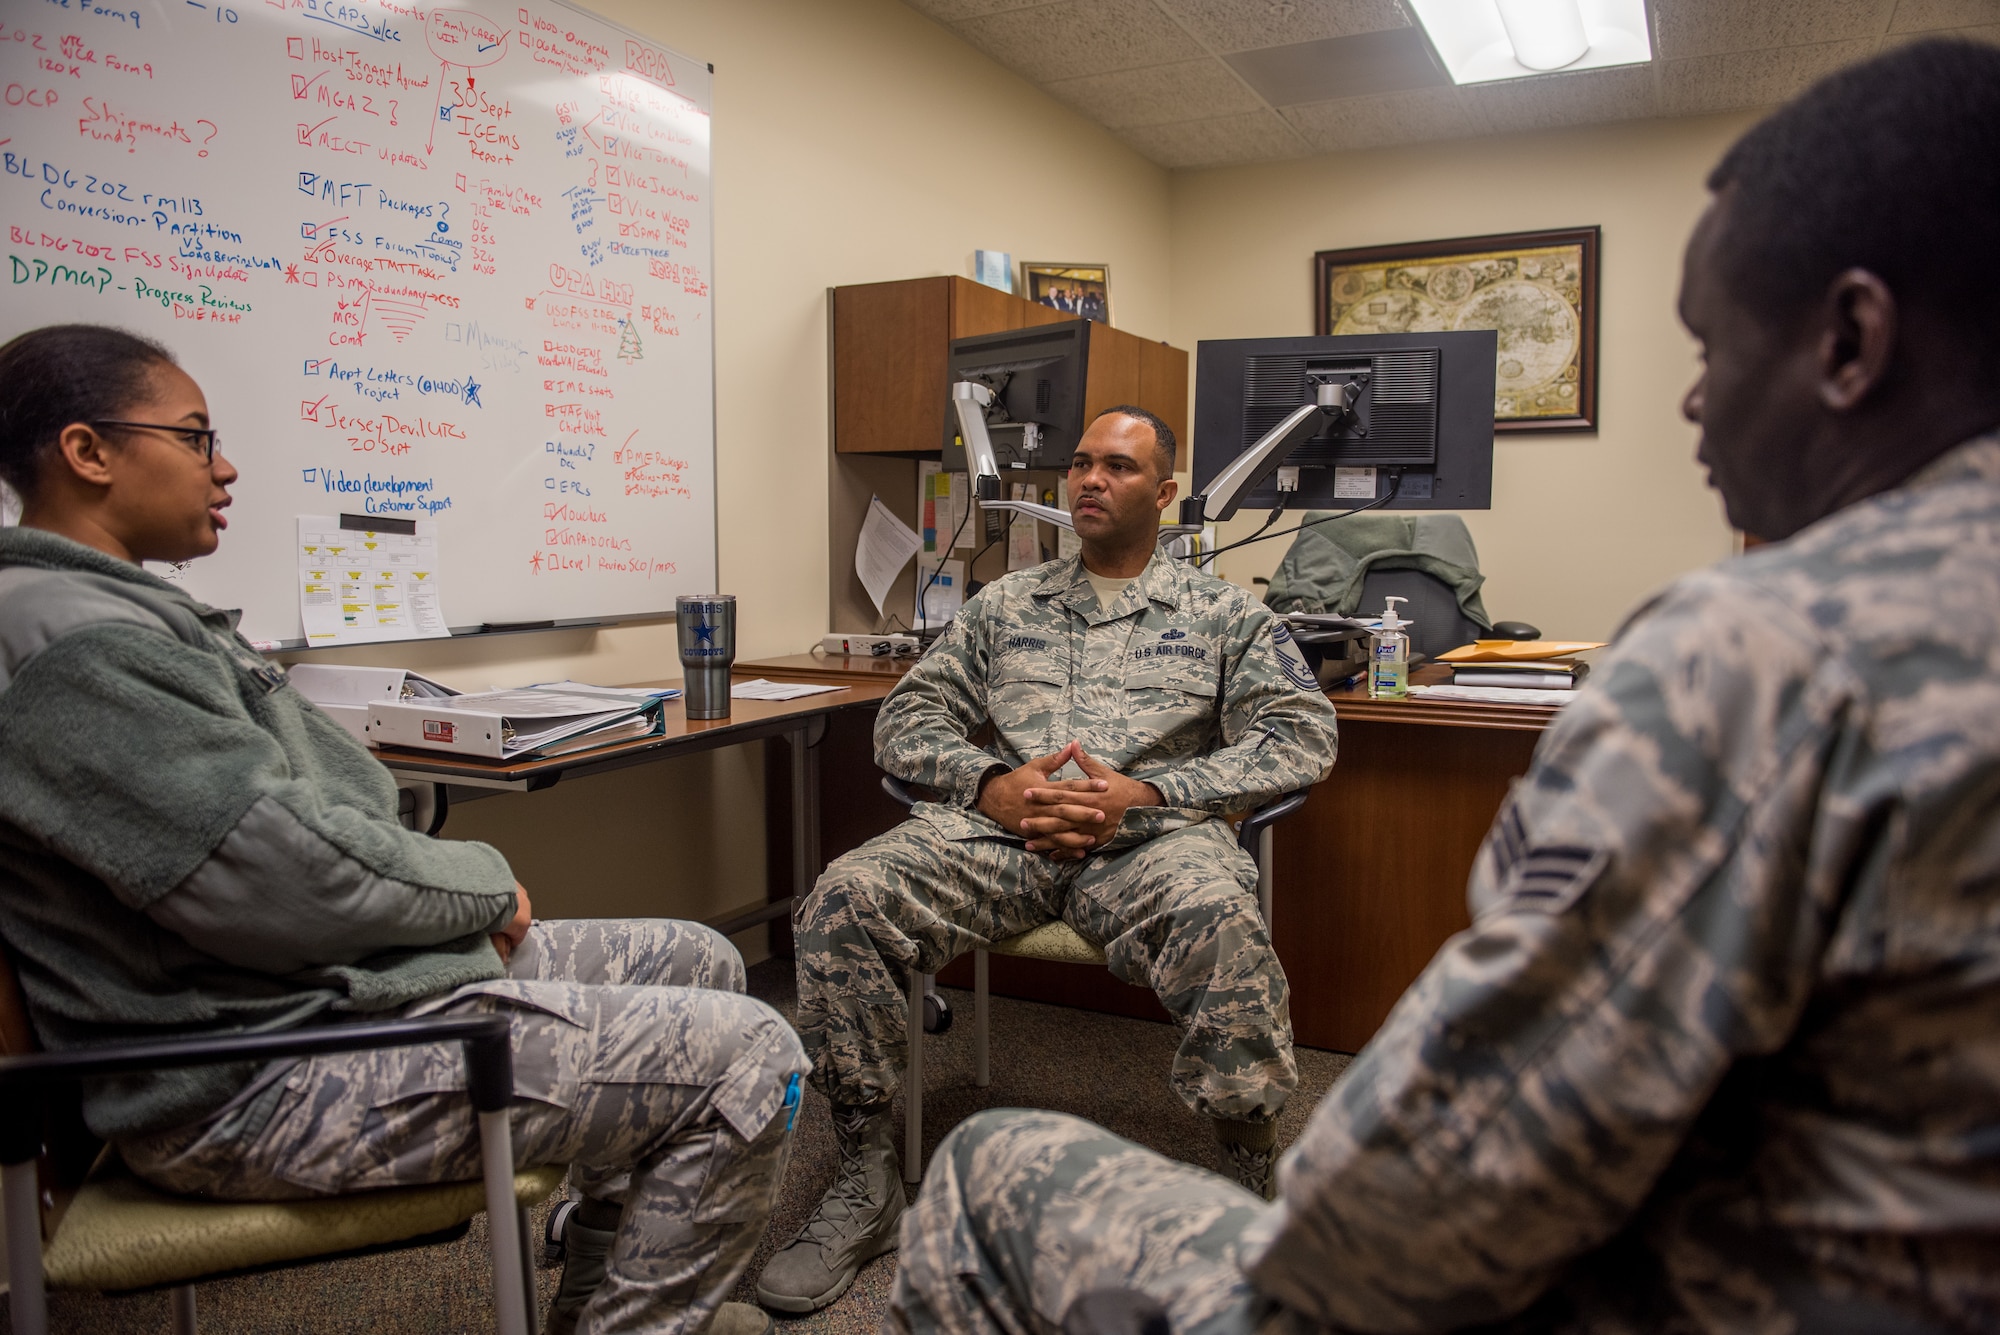 Chief Master Sgt. Anthony Harris, 512 Airlift Wing Force Support Squadron superintendent, holds a feedback session with Senior Airman Maboury Gueye and Staff Sgt. Tiffany McClammy, two FSS Airmen, at Dover Air Force Base Delaware, Nov. 24, 2018. Harris meets with lower ranking Airmen as a way to garner input for innovating wing processes. (U.S. Air Force photo by Staff Sgt. Damien Taylor)